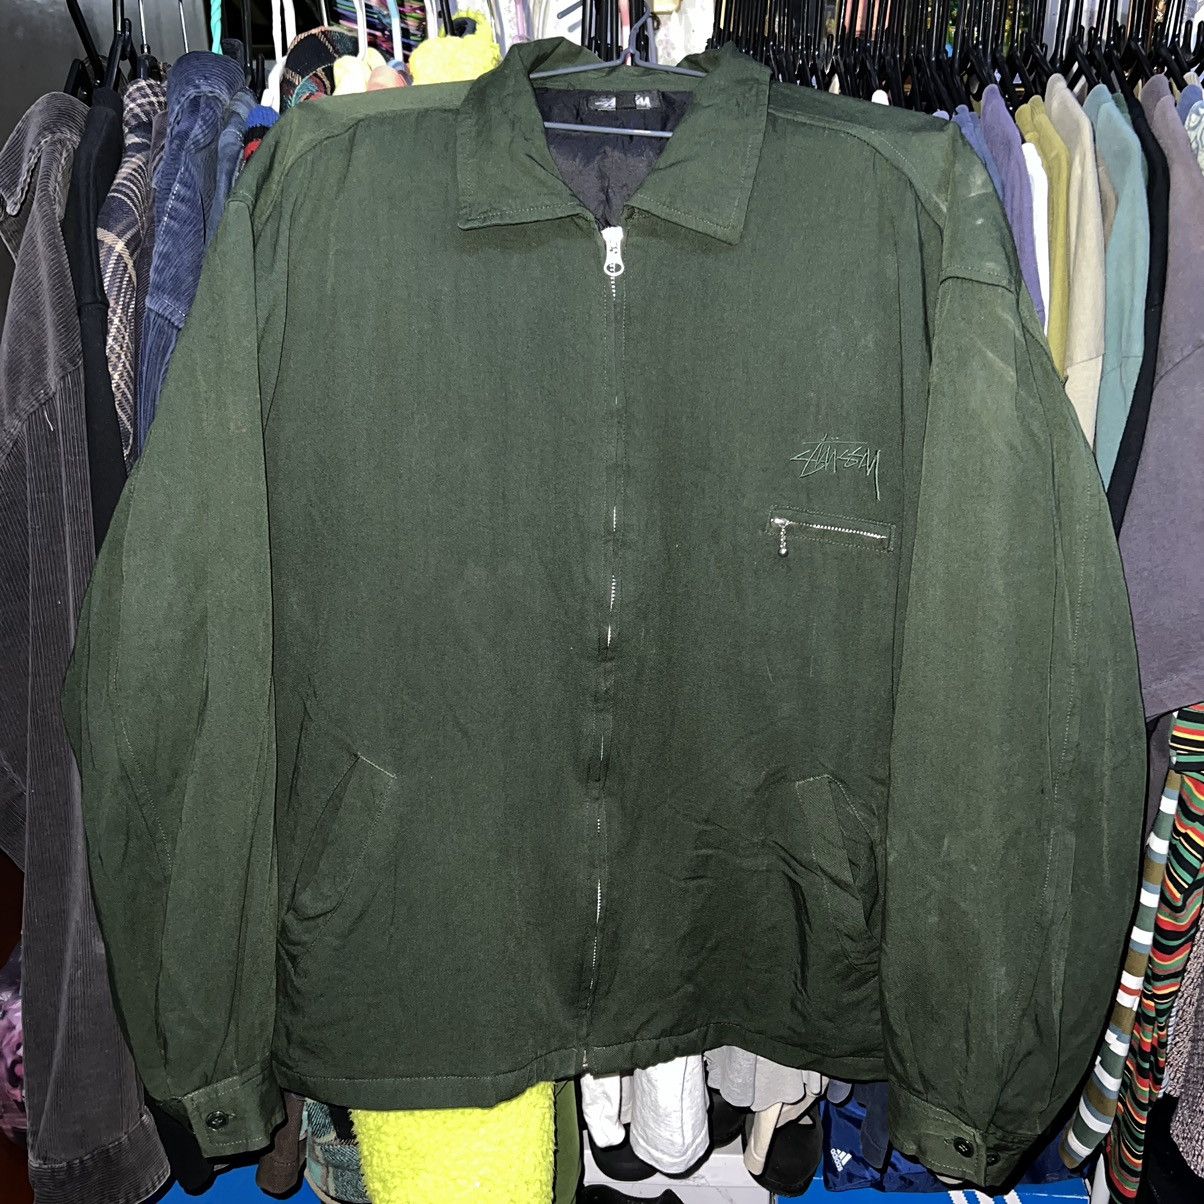 Vintage Rare Vintage 90s Stussy swing top rayon shell jacket | Grailed